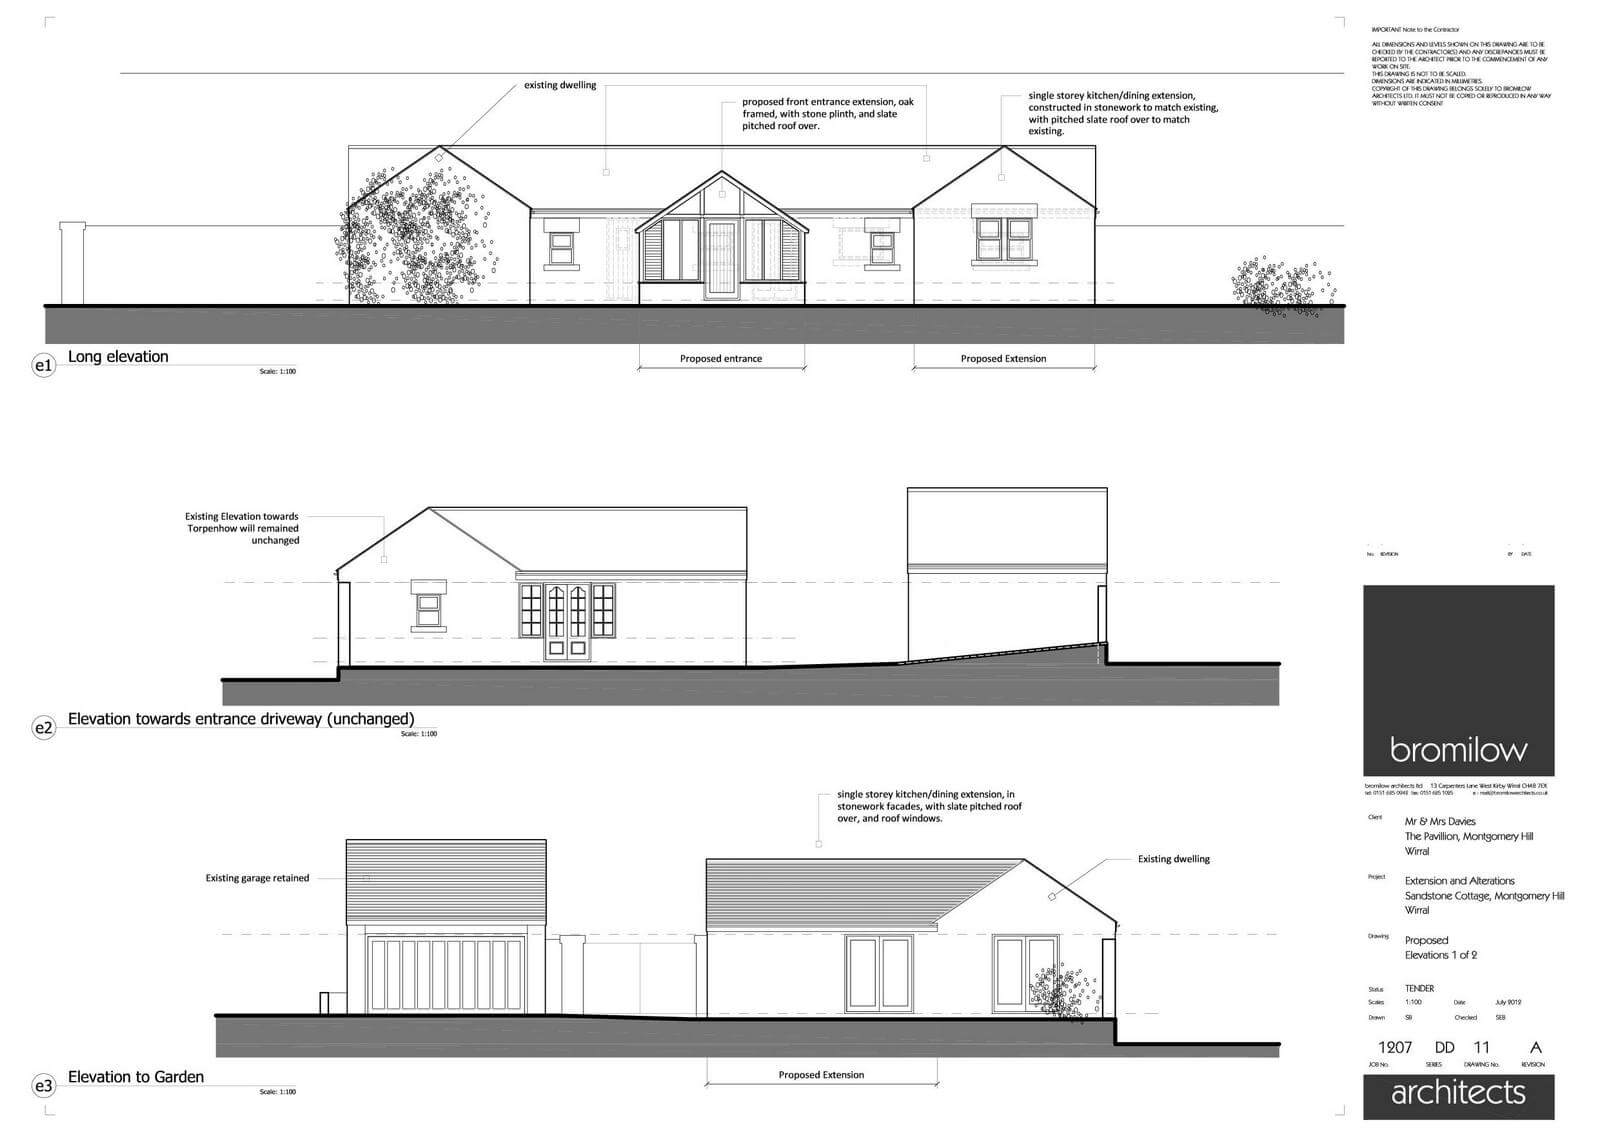 1207 DD 011A - Sandstone Cottage - Proposed Elevations 1 of 2 A3-001